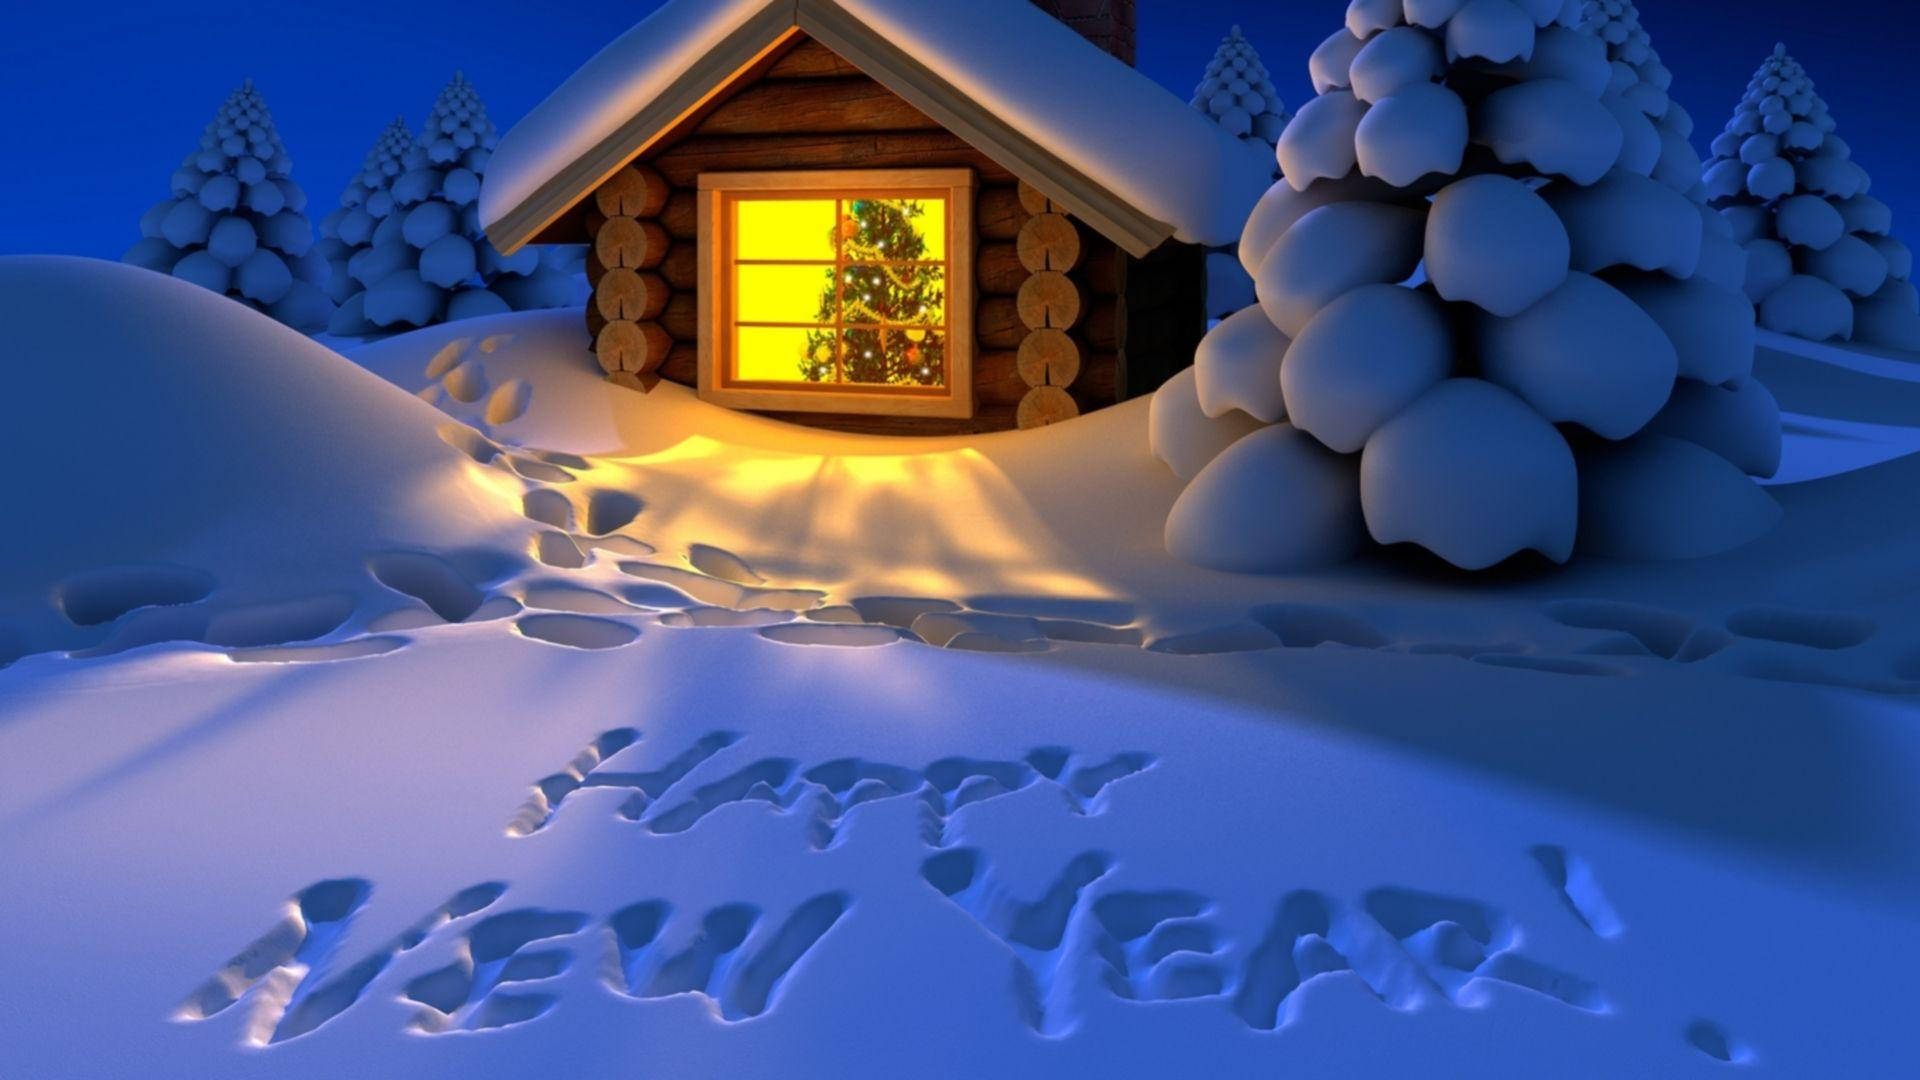 Winter Theme Happy New Year 2021 Greetings Background